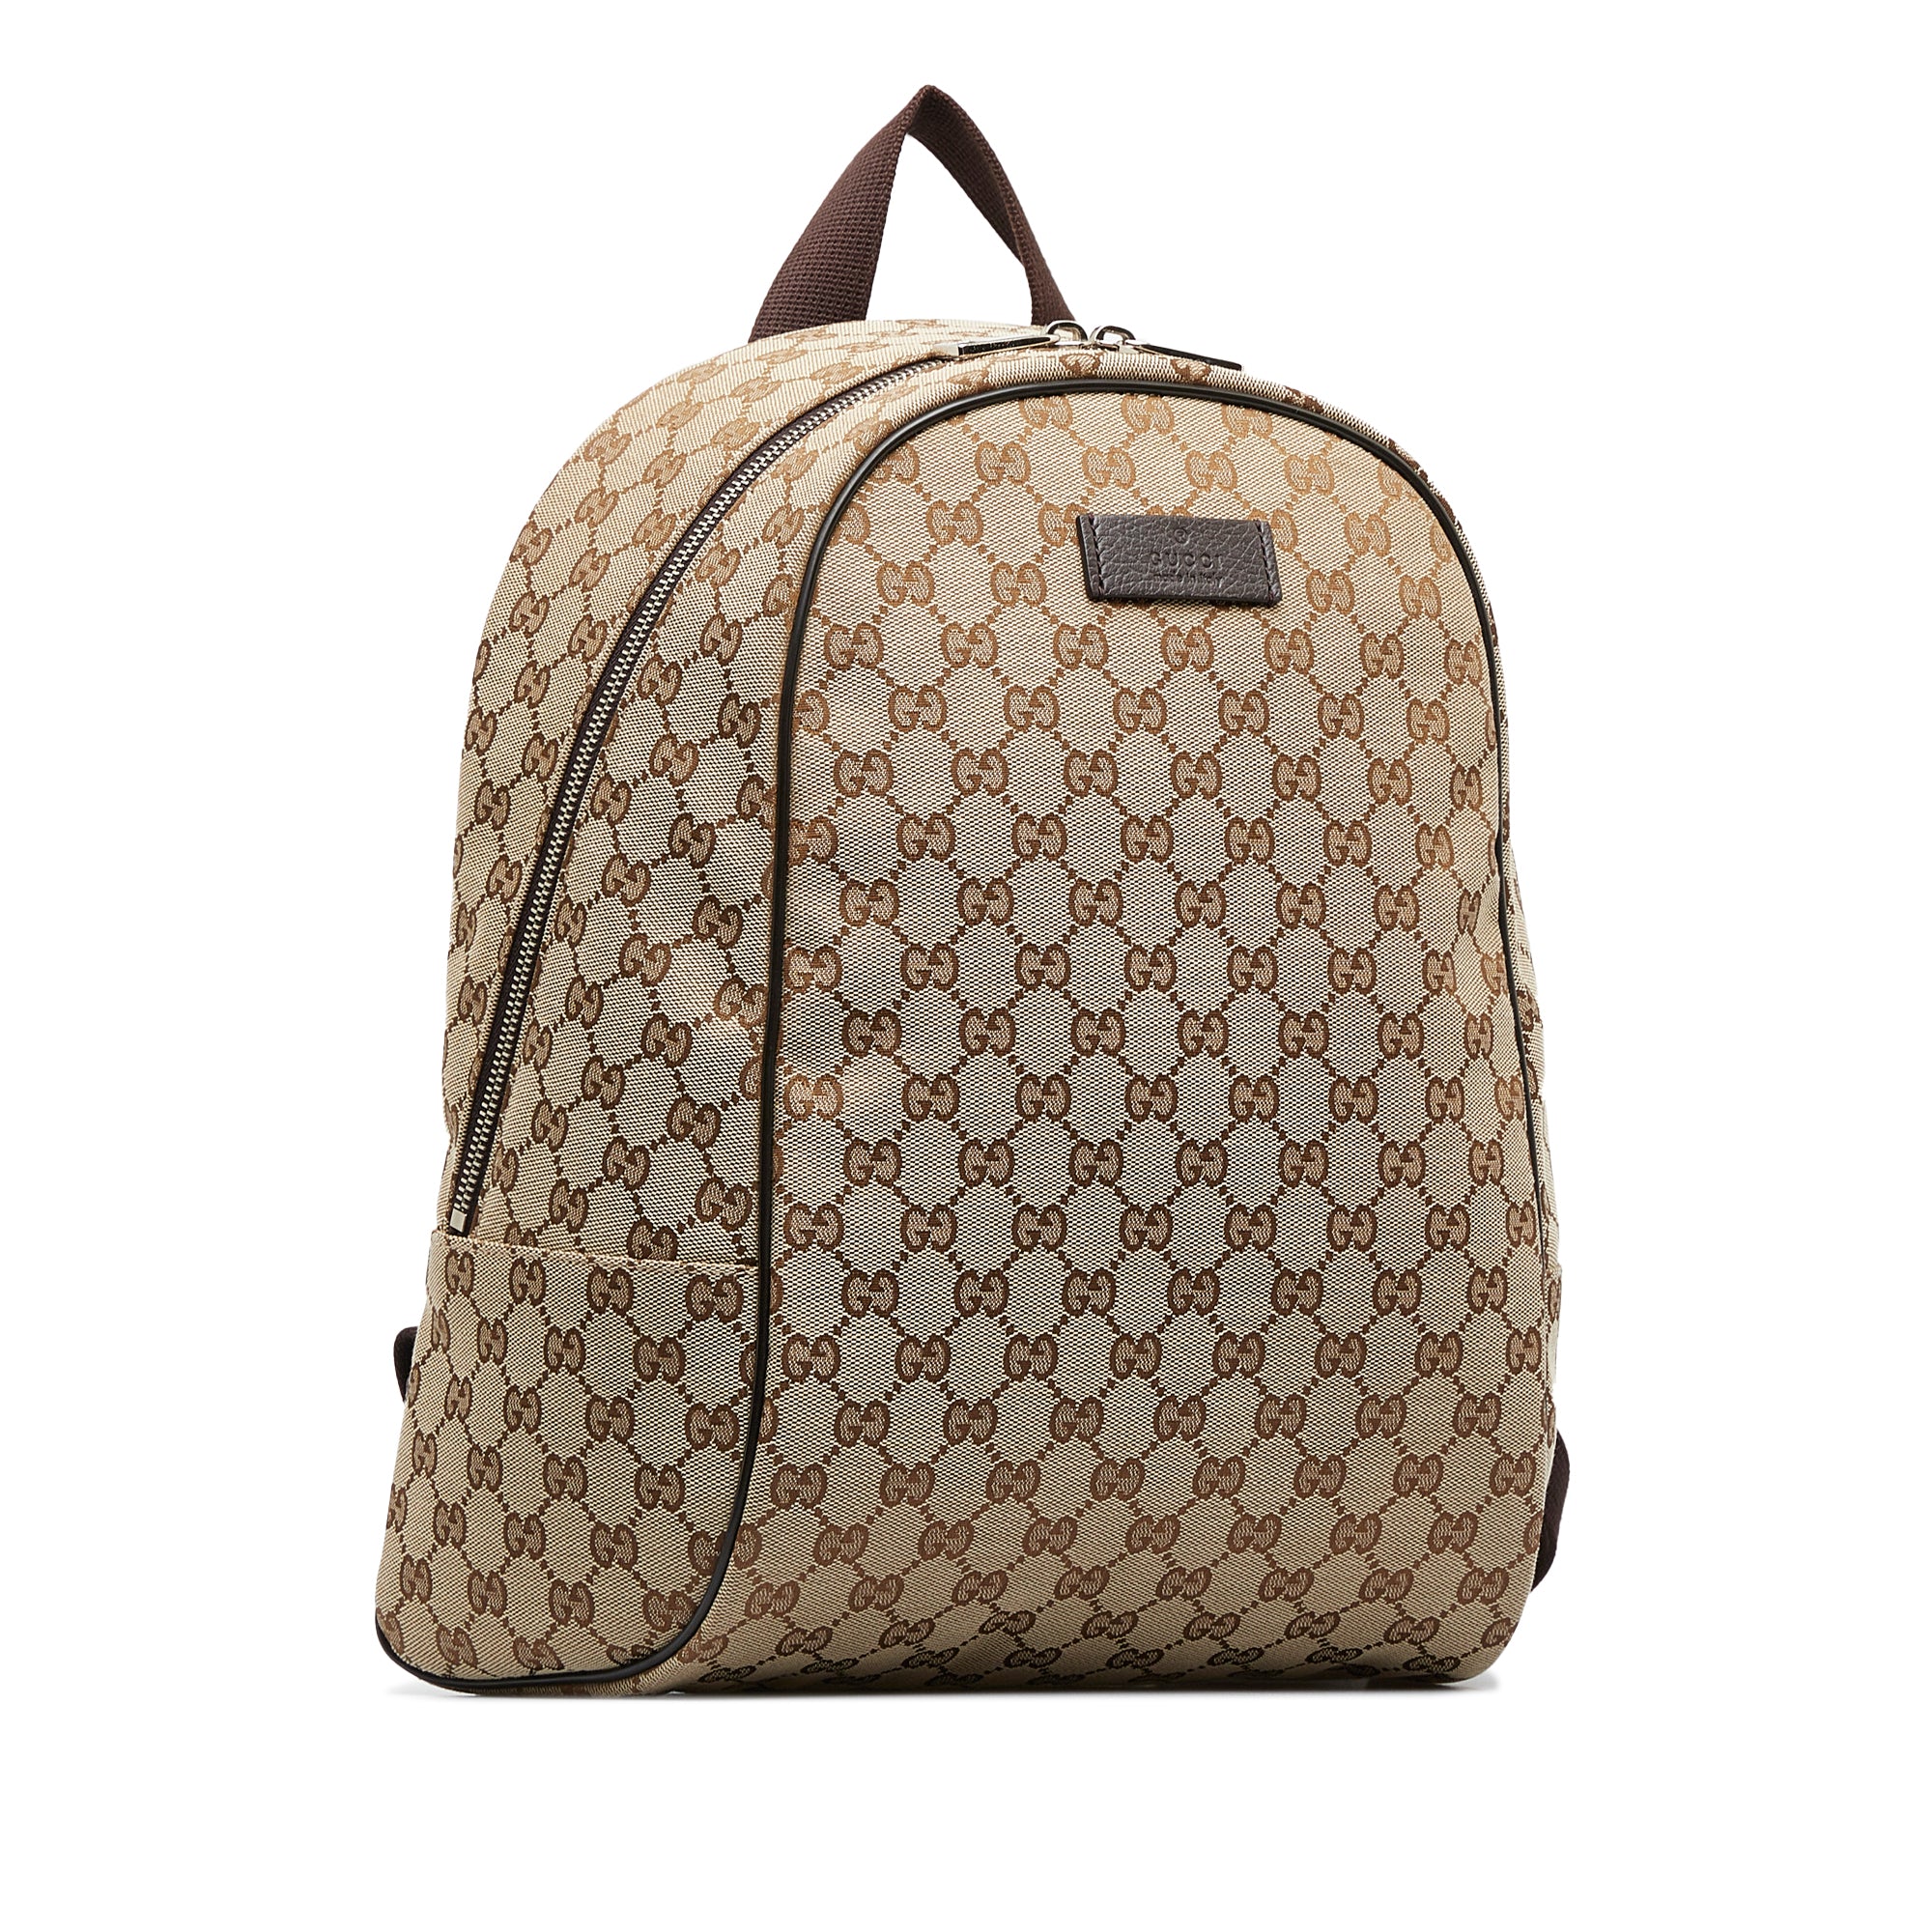 Gucci Brown Monogram Canvas Travel Backpack 